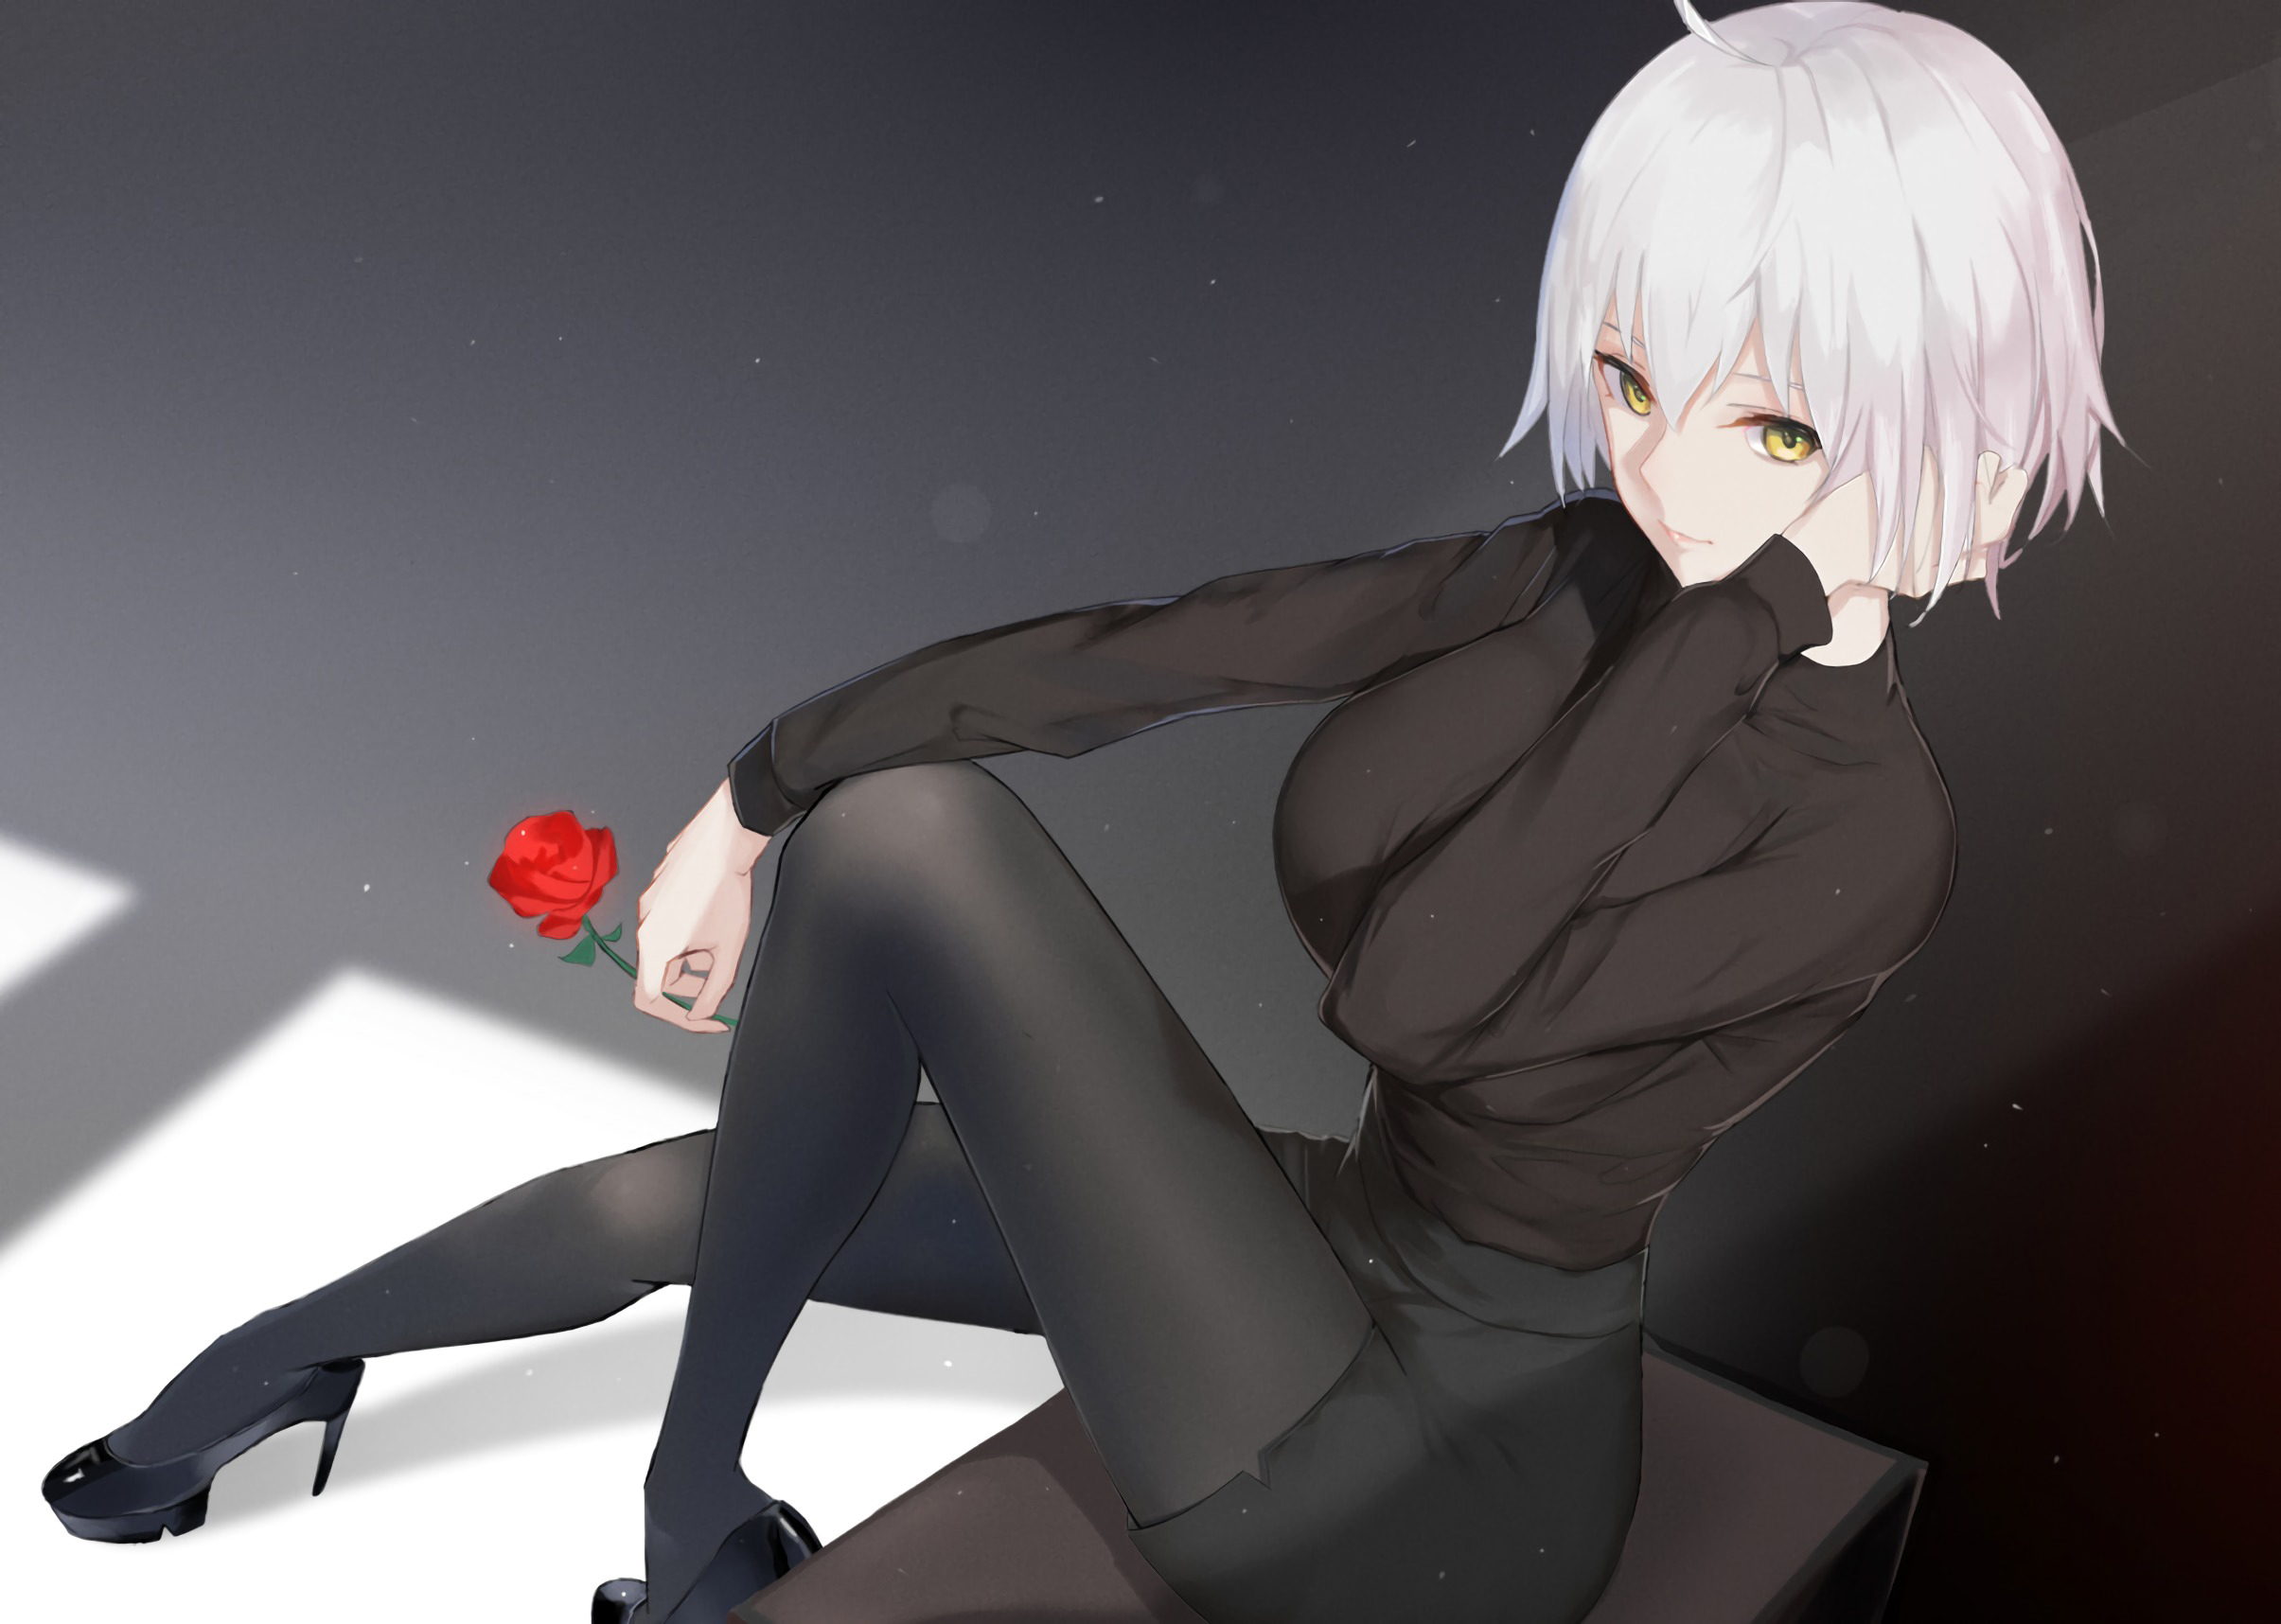 Anime 2410x1716 Jeanne (Alter) (Fate/Grand Order) Fate series Fate/Grand Order Avenger (Fate/Grand Order) white hair yellow eyes anime girls Mobile Game short hair rose high heels thigh-highs